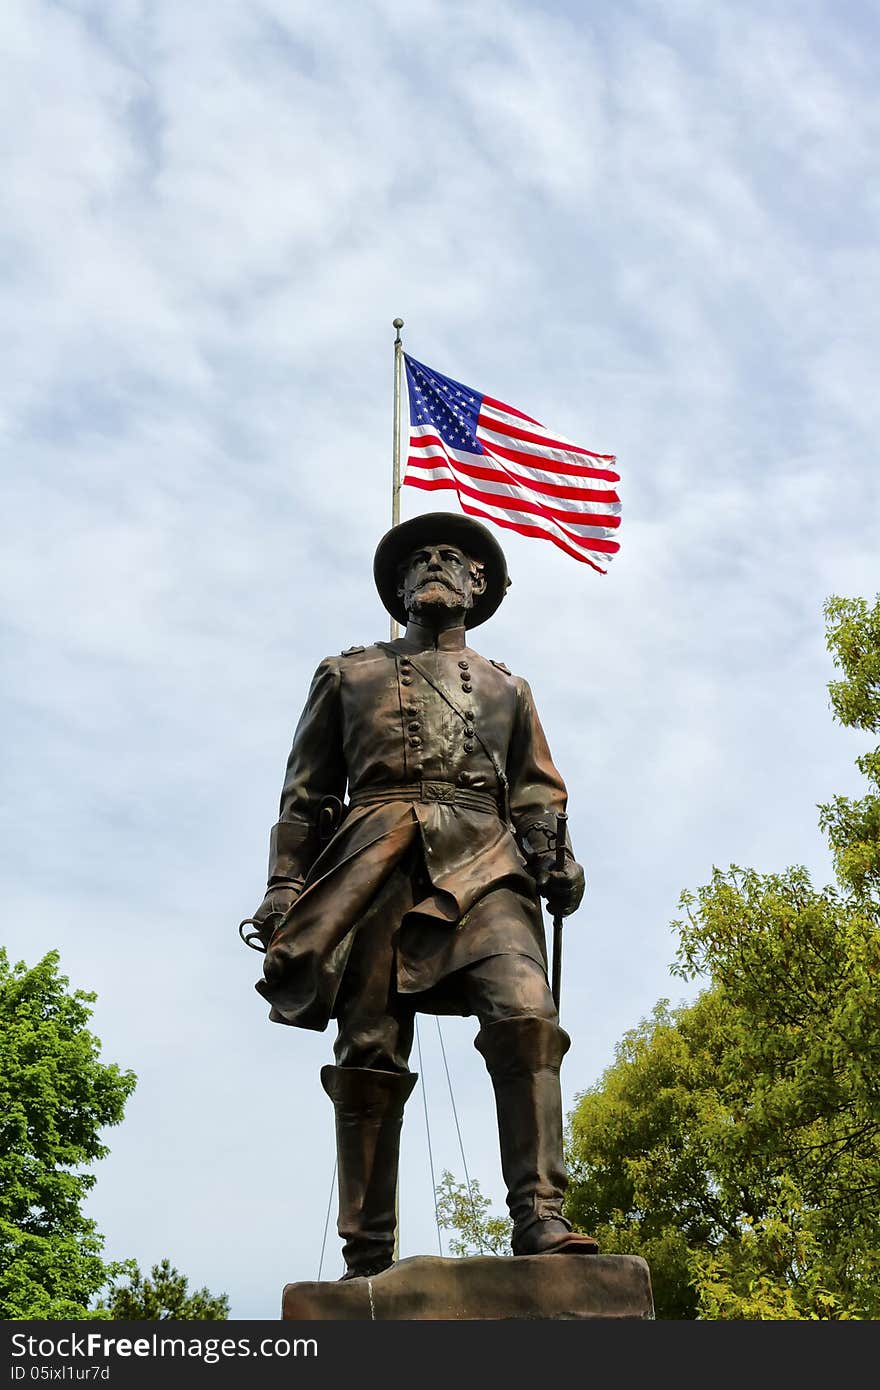 Statue of General William Wells with the American flag in the background